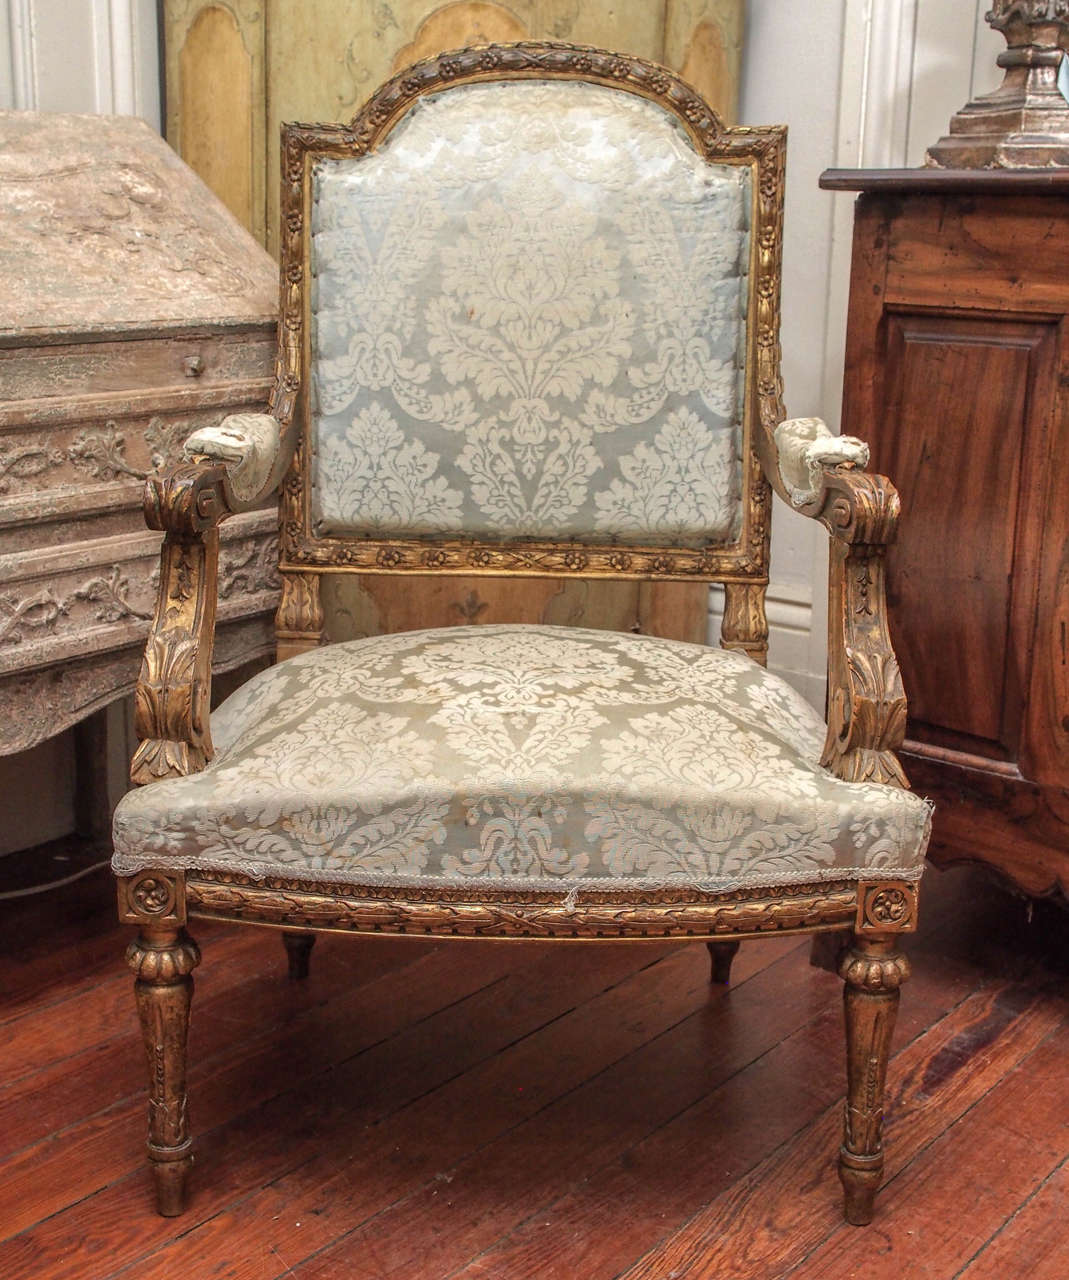 Pair of 19th century Louis XVI style carved giltwood fauteuils.
We have reupholstered these two armchairs with white linen fabric.
Pictures sent upon request.